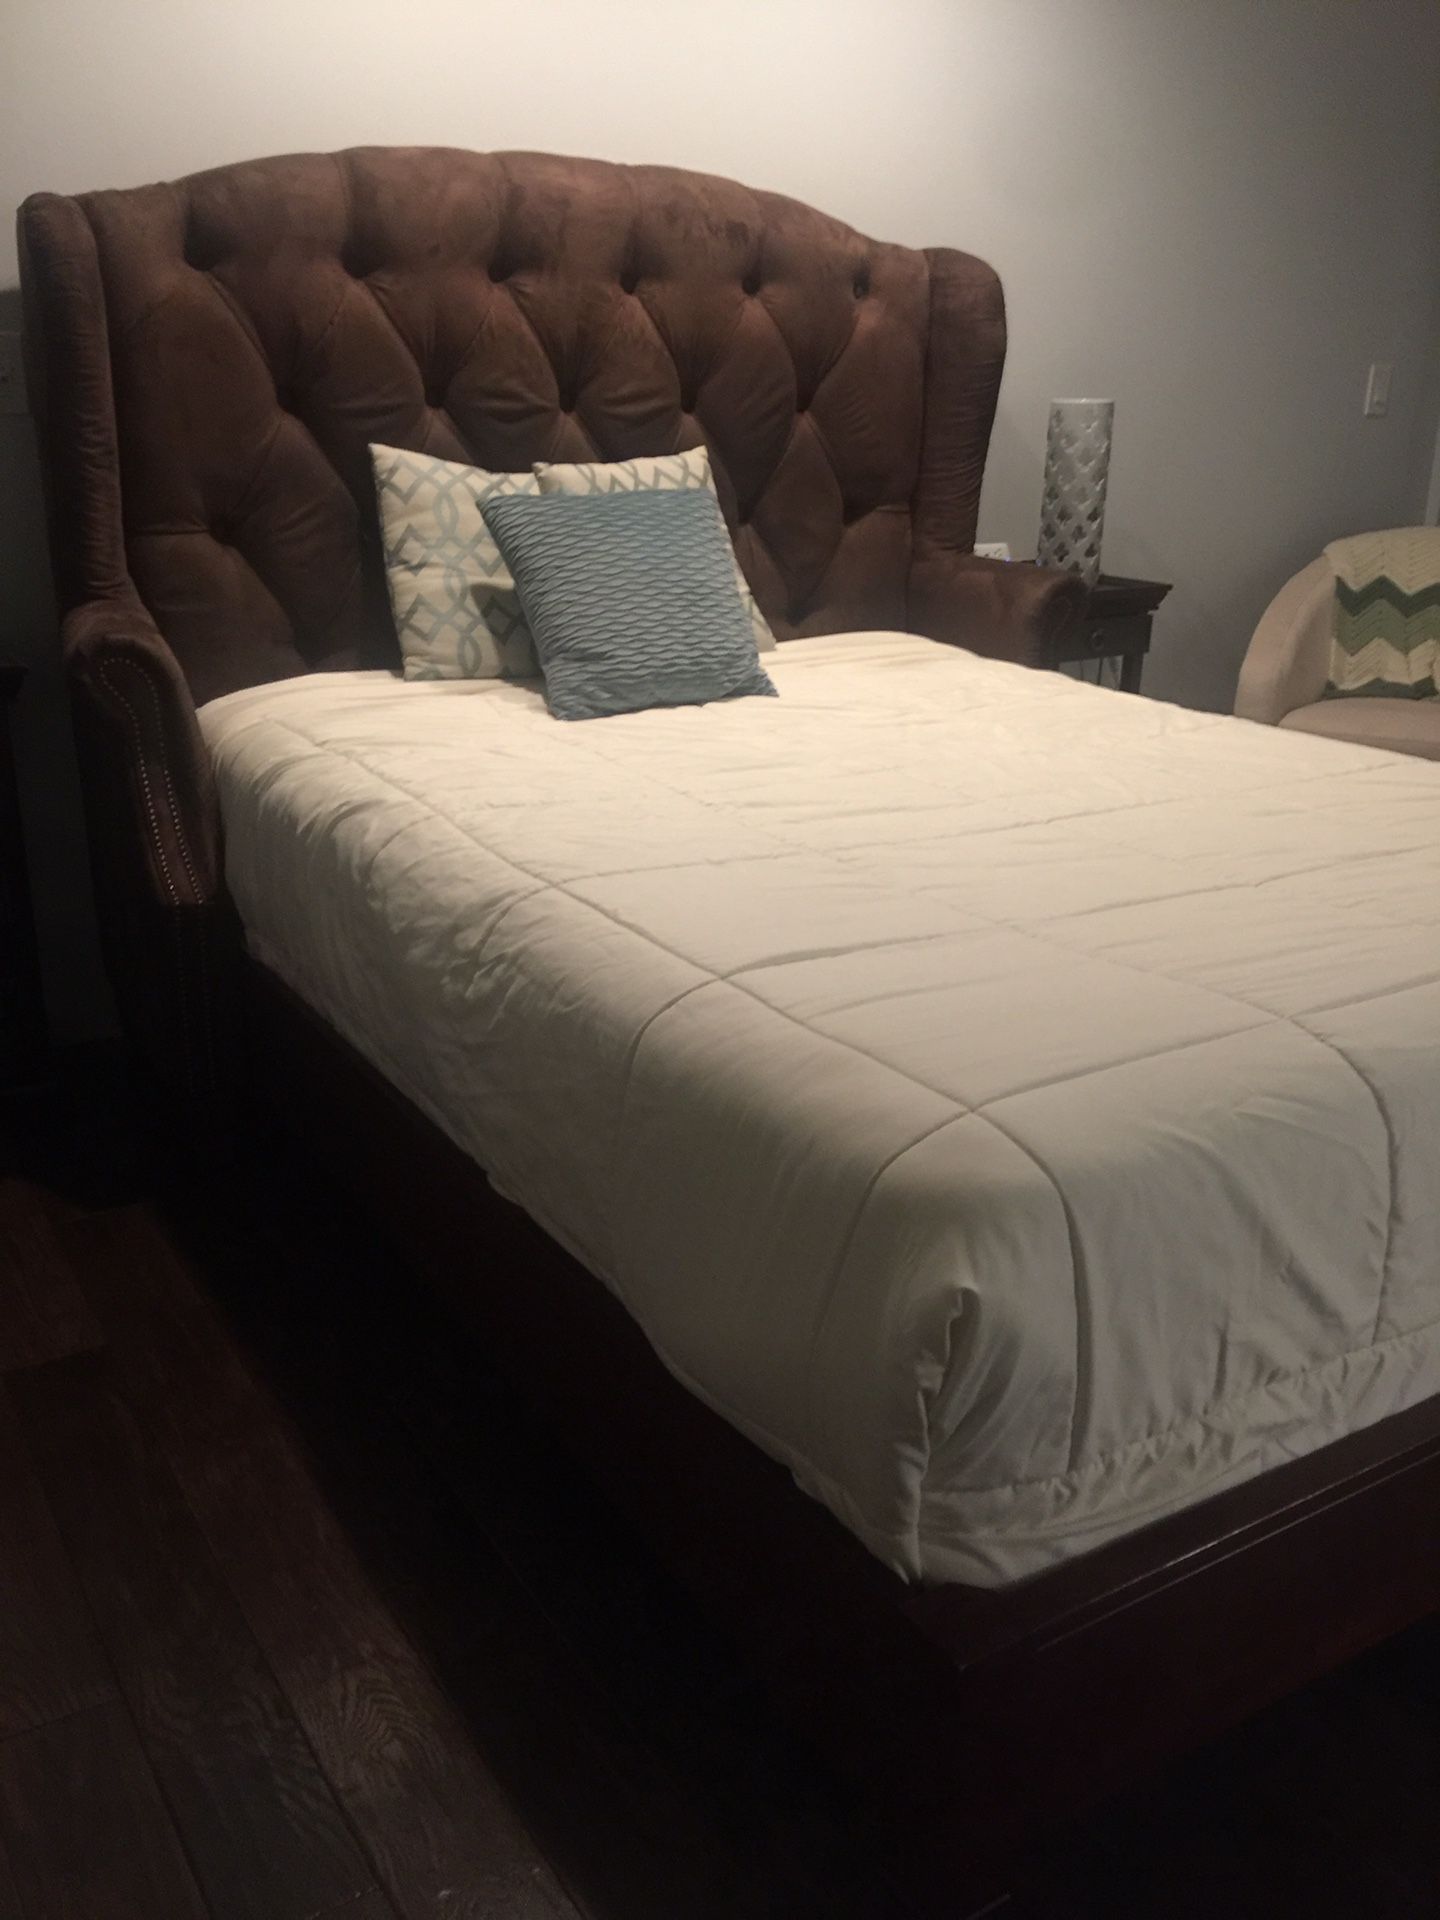 Bombay Queen upholstered headboard and wood frame (mattress and/or box spring free) for Queen bed